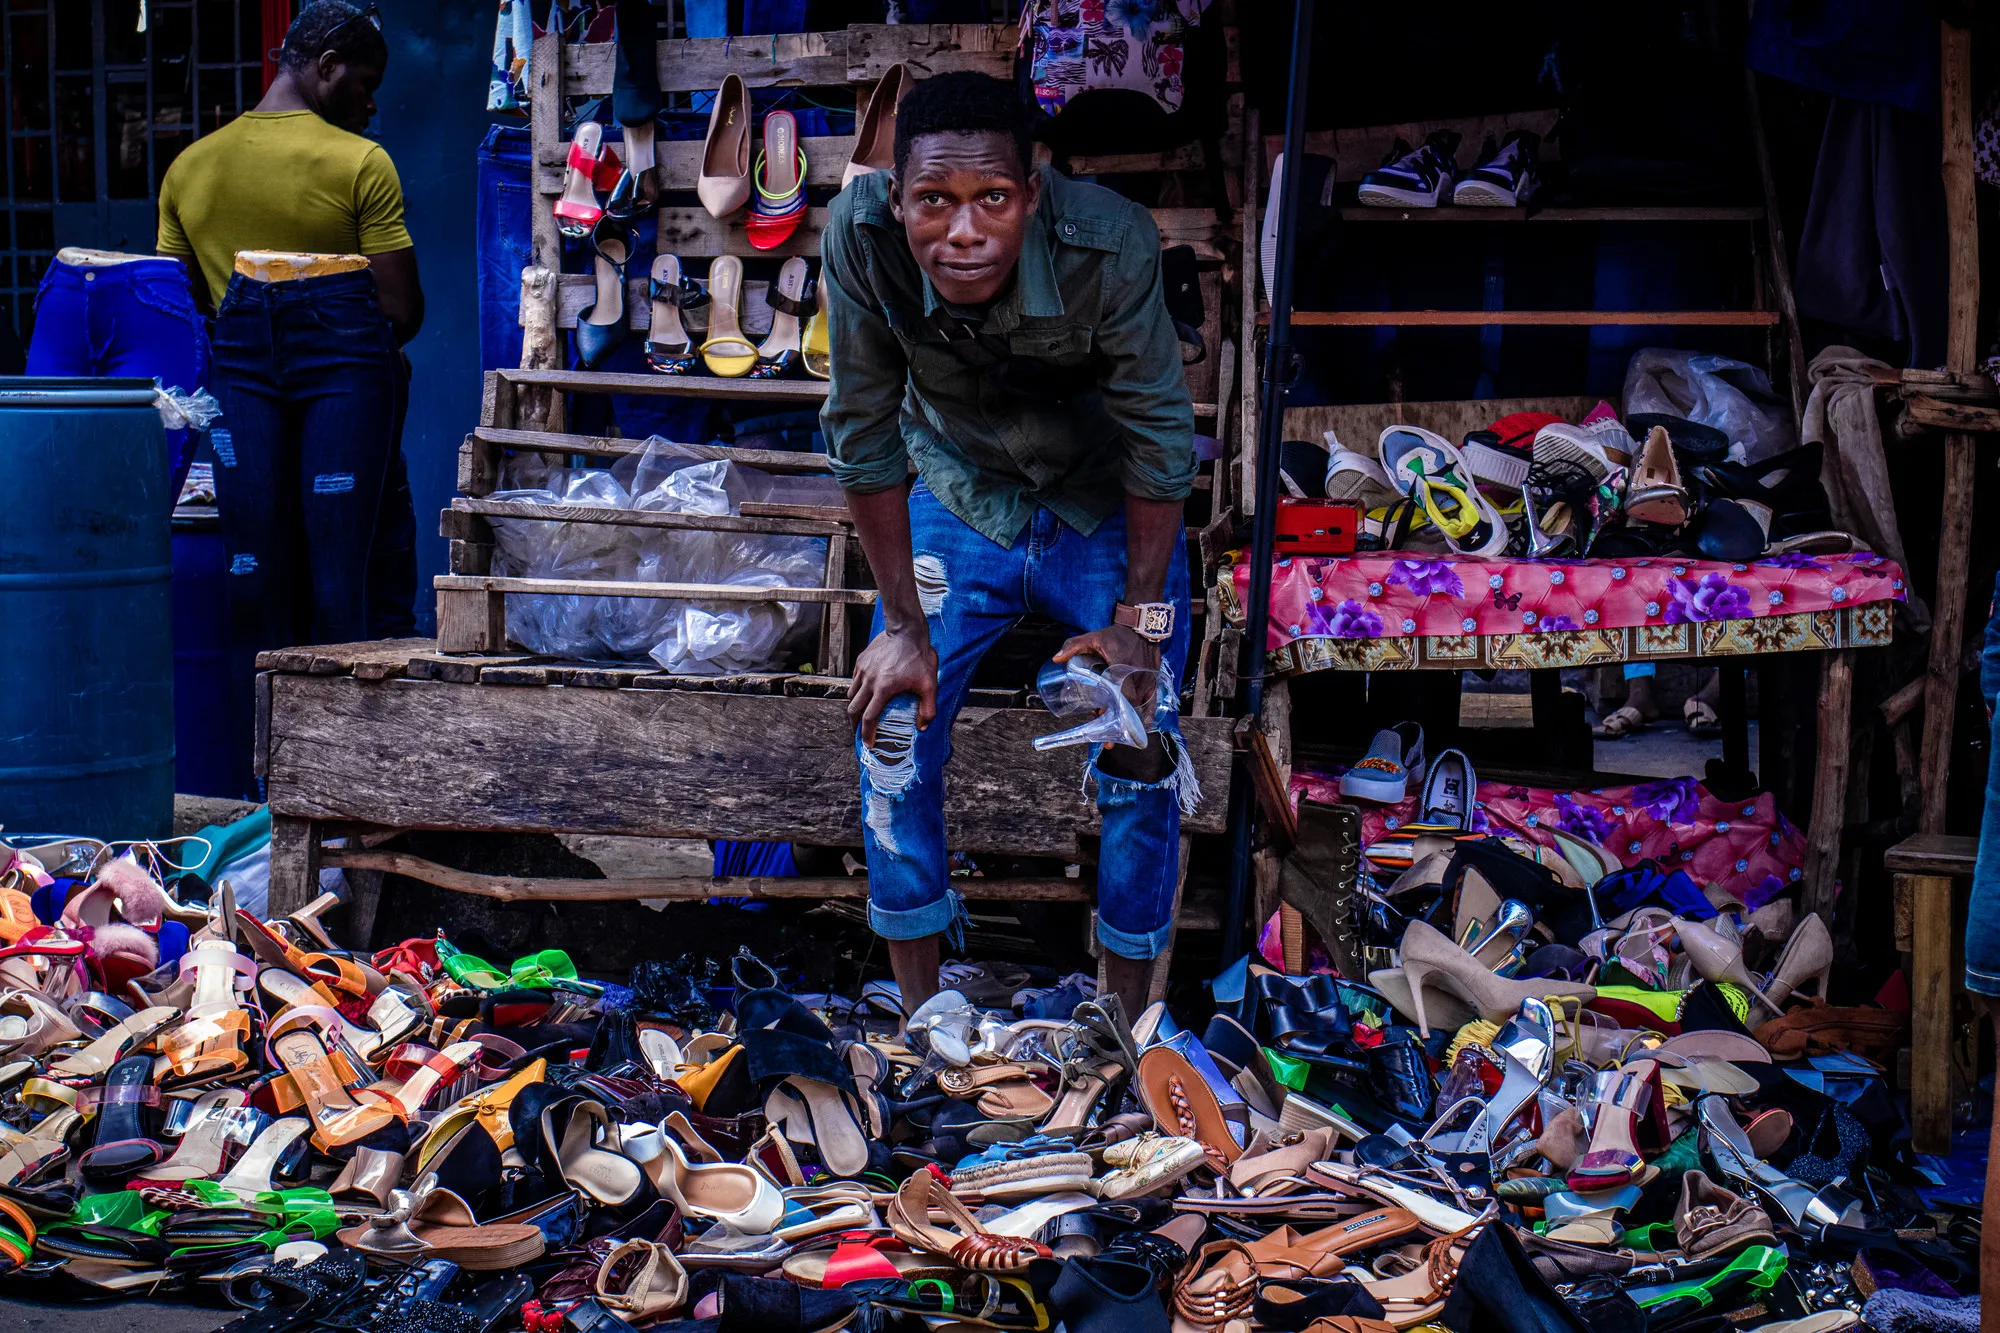 A man stands in front of bundles of shoes in an open-air stall.